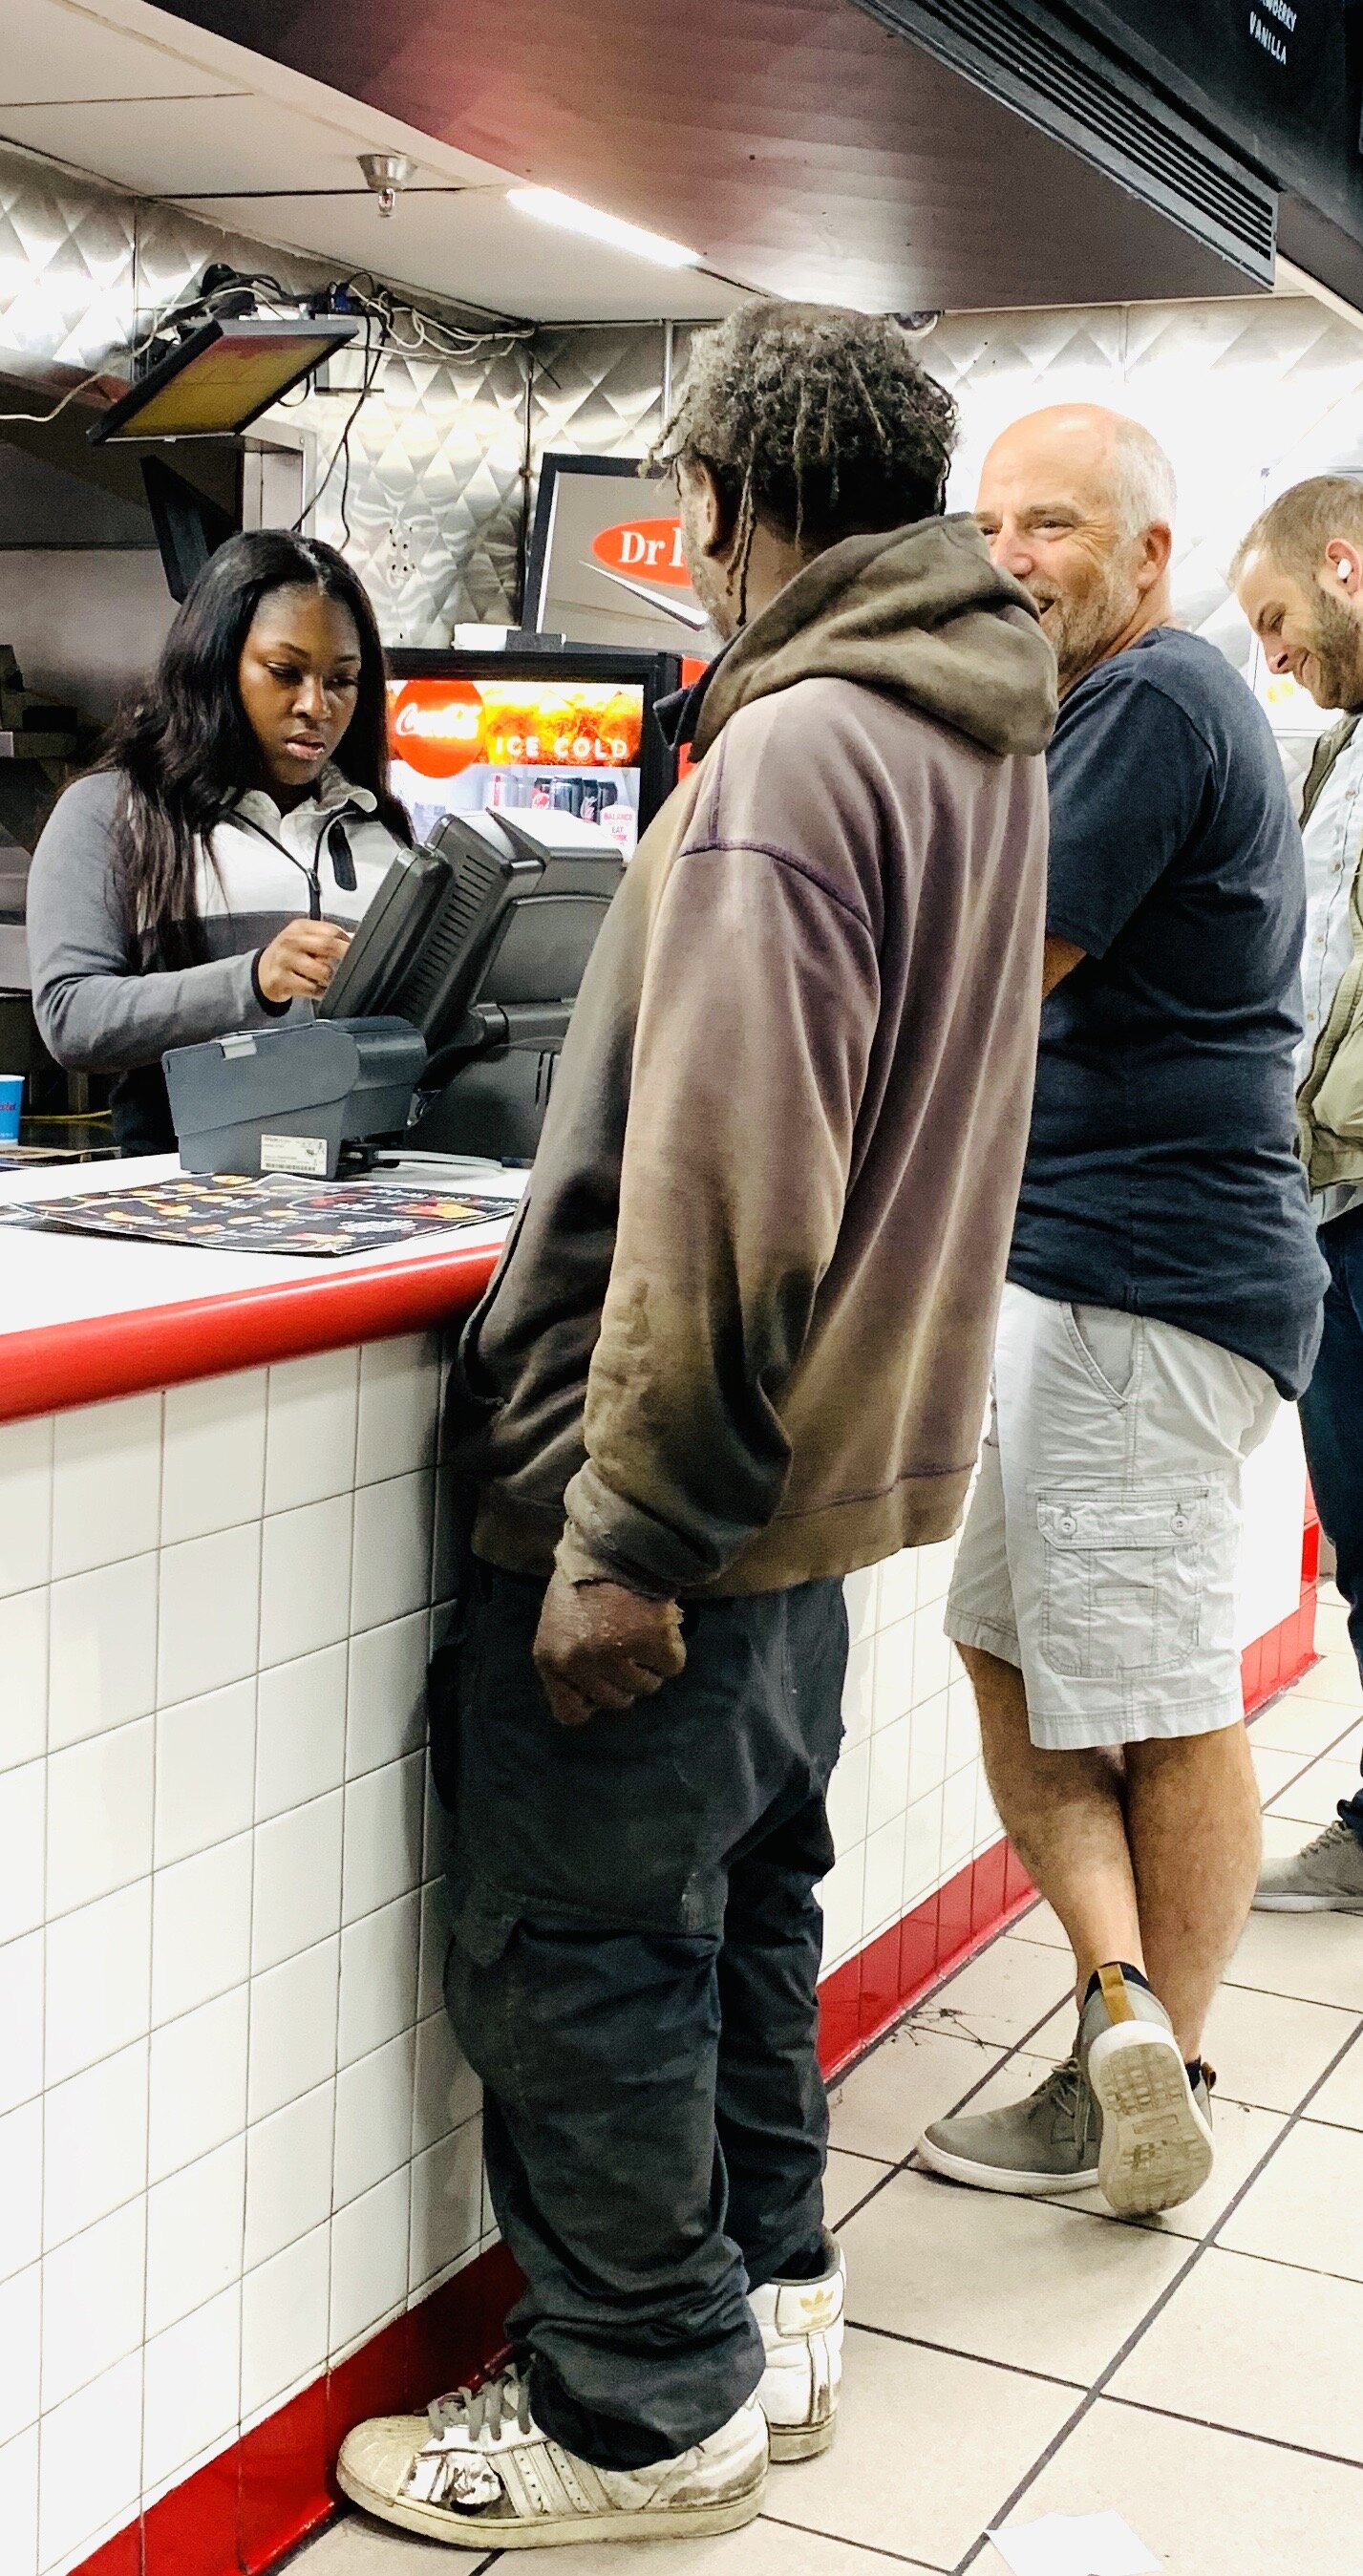  A man outside the Krystal on Bourbon Street asked Craig to buy him something to eat. Craig said he would, but later said he had to “cut him off” because he was ordering two of everything on the menu. 😃 